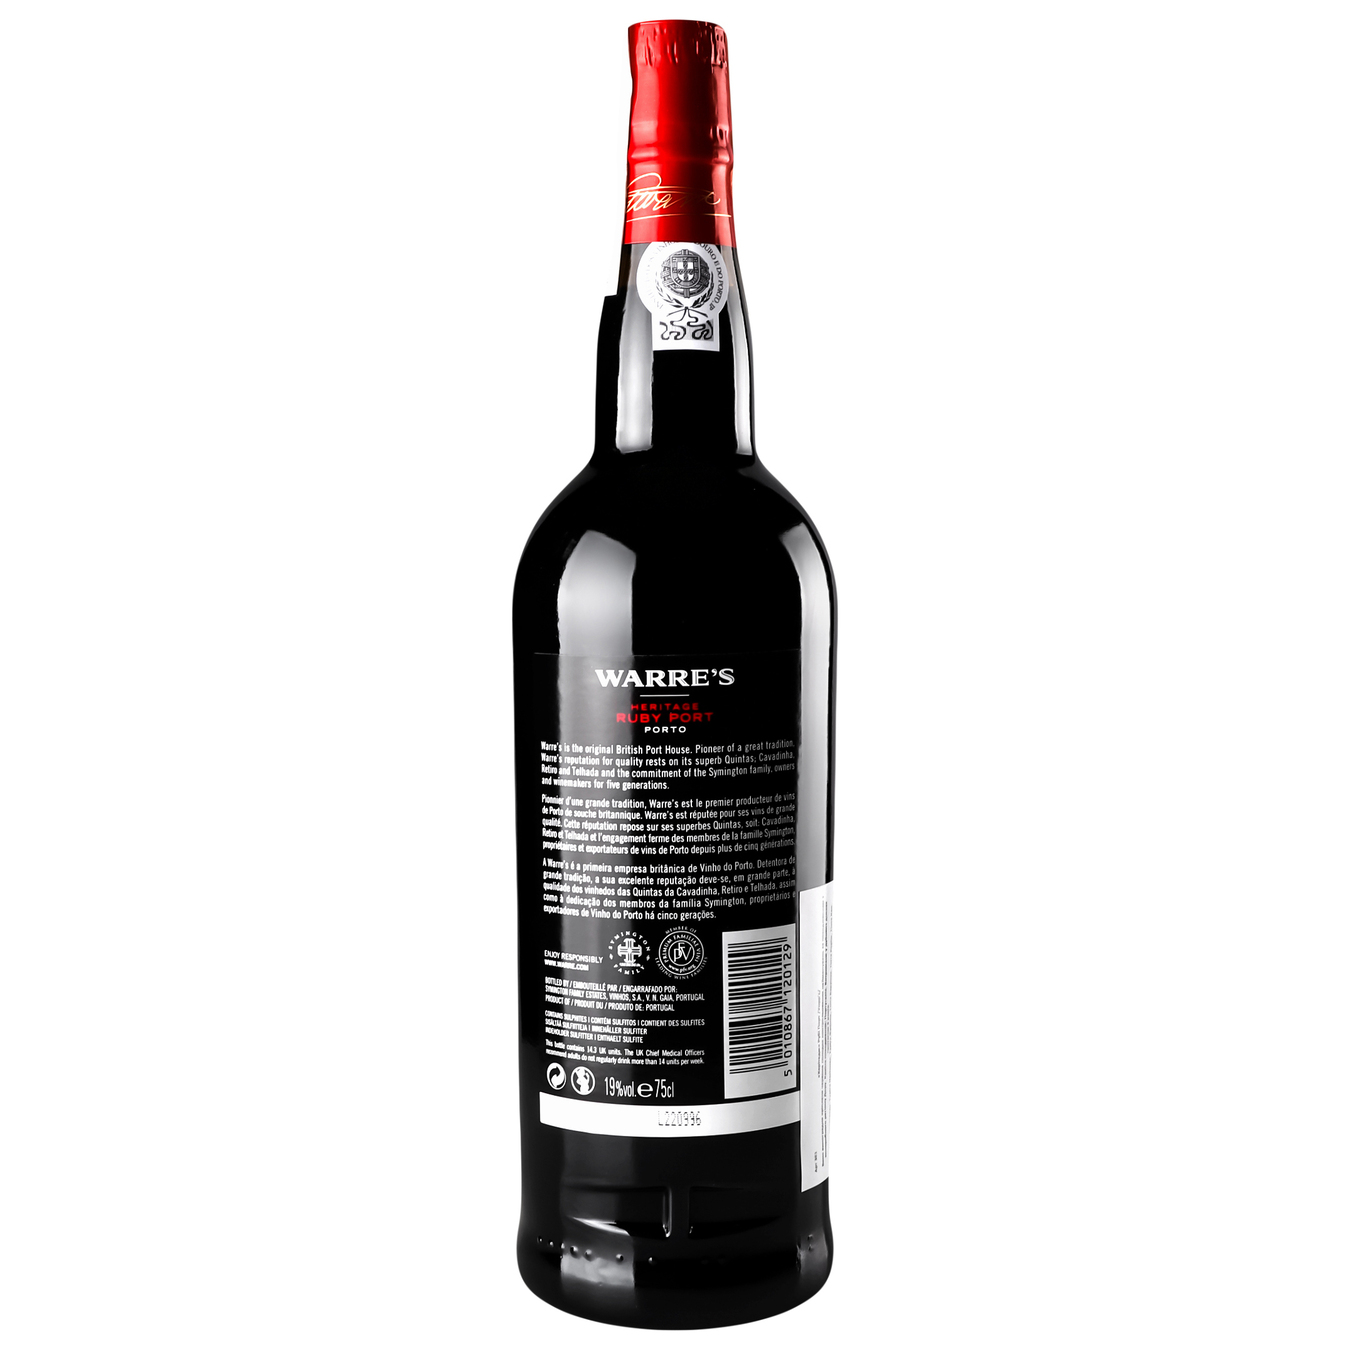 Warre's Heritage Ruby Port red dry fortified wine 19% 0.75 l 2